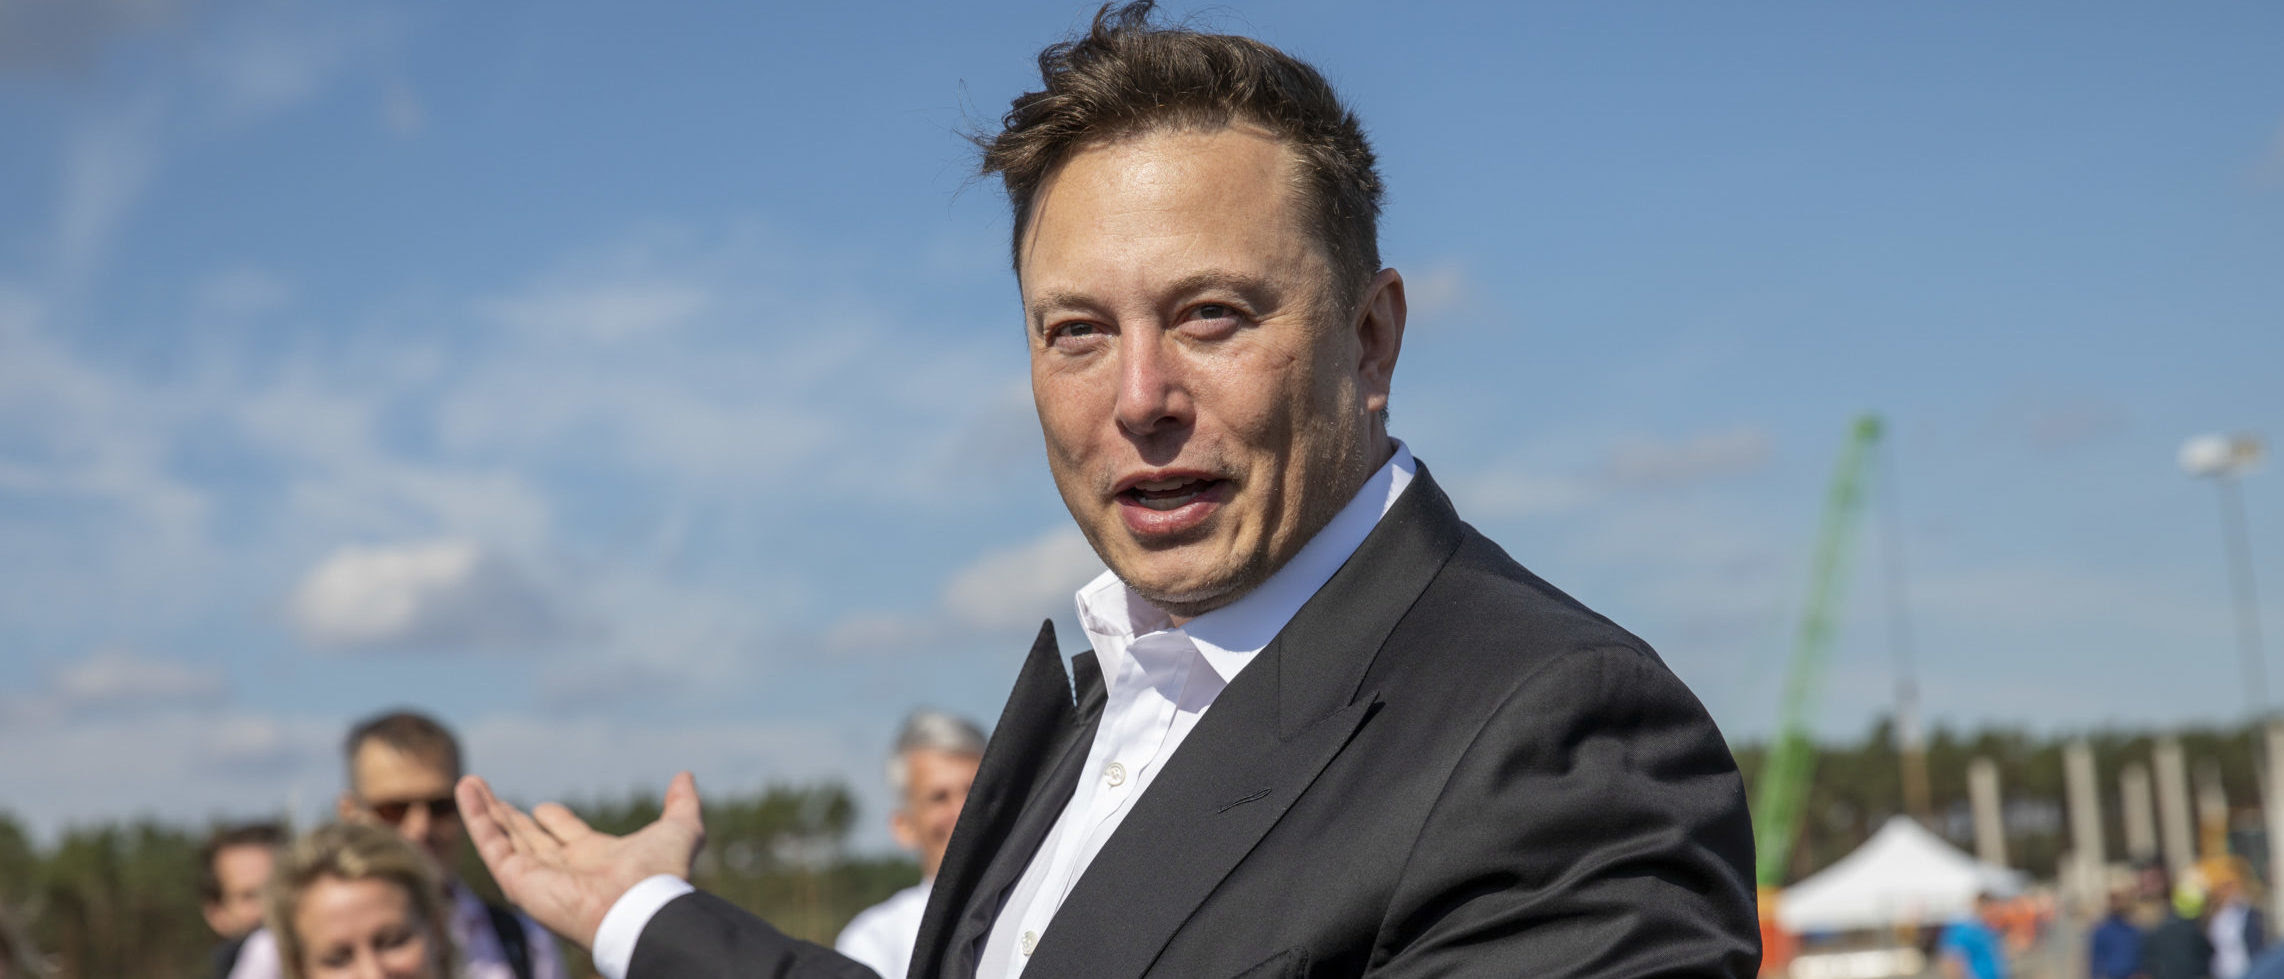 ‘Hate To Say It’: Elon Musk Says US Needs To Boost Fossil Fuel Production ‘Immediately’